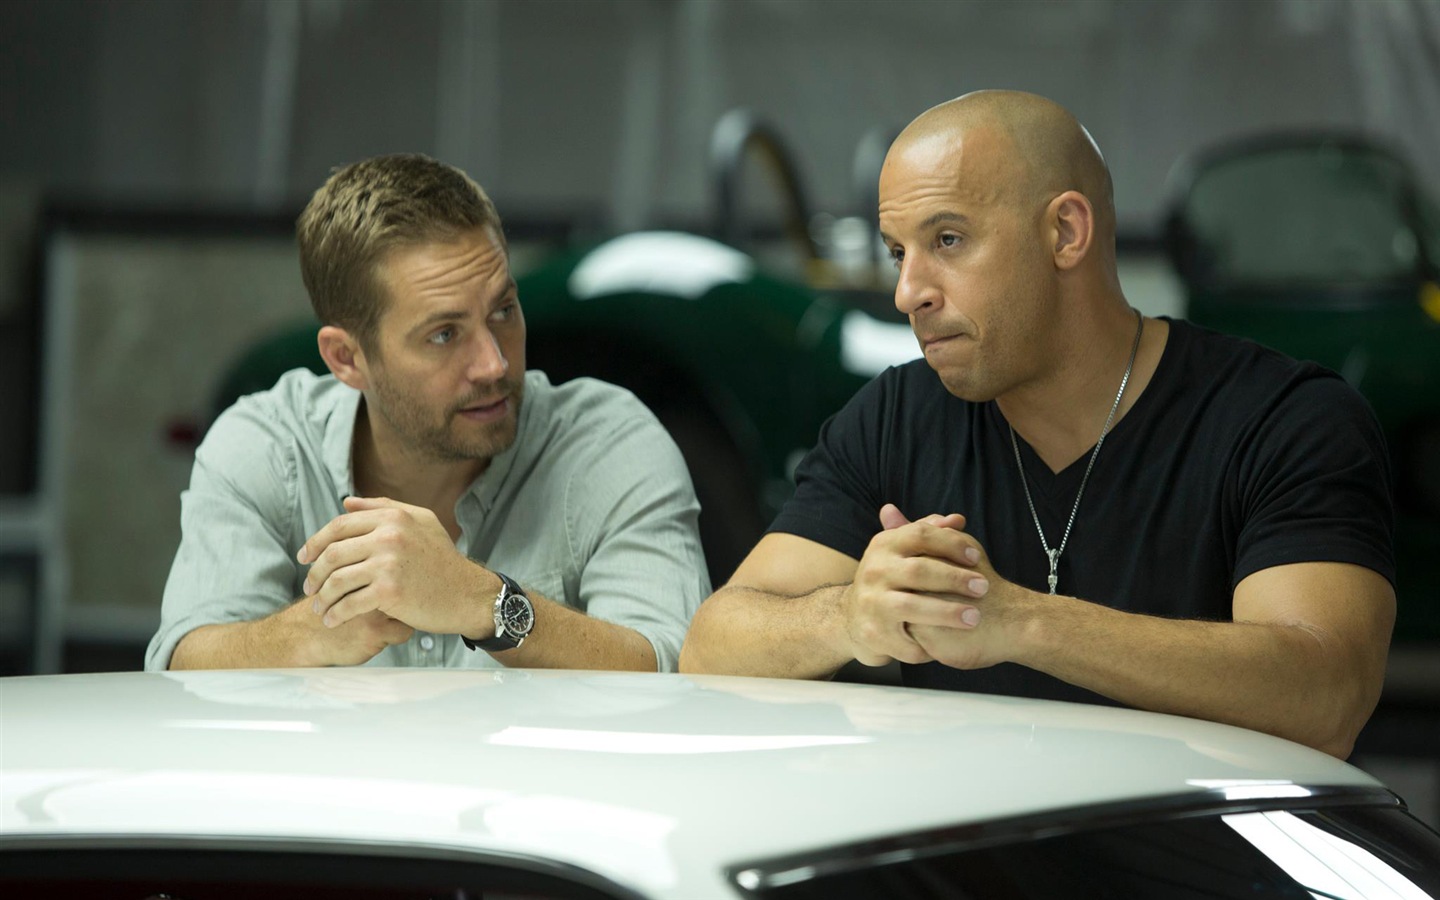 Fast And Furious 6 HD movie wallpapers #8 - 1440x900